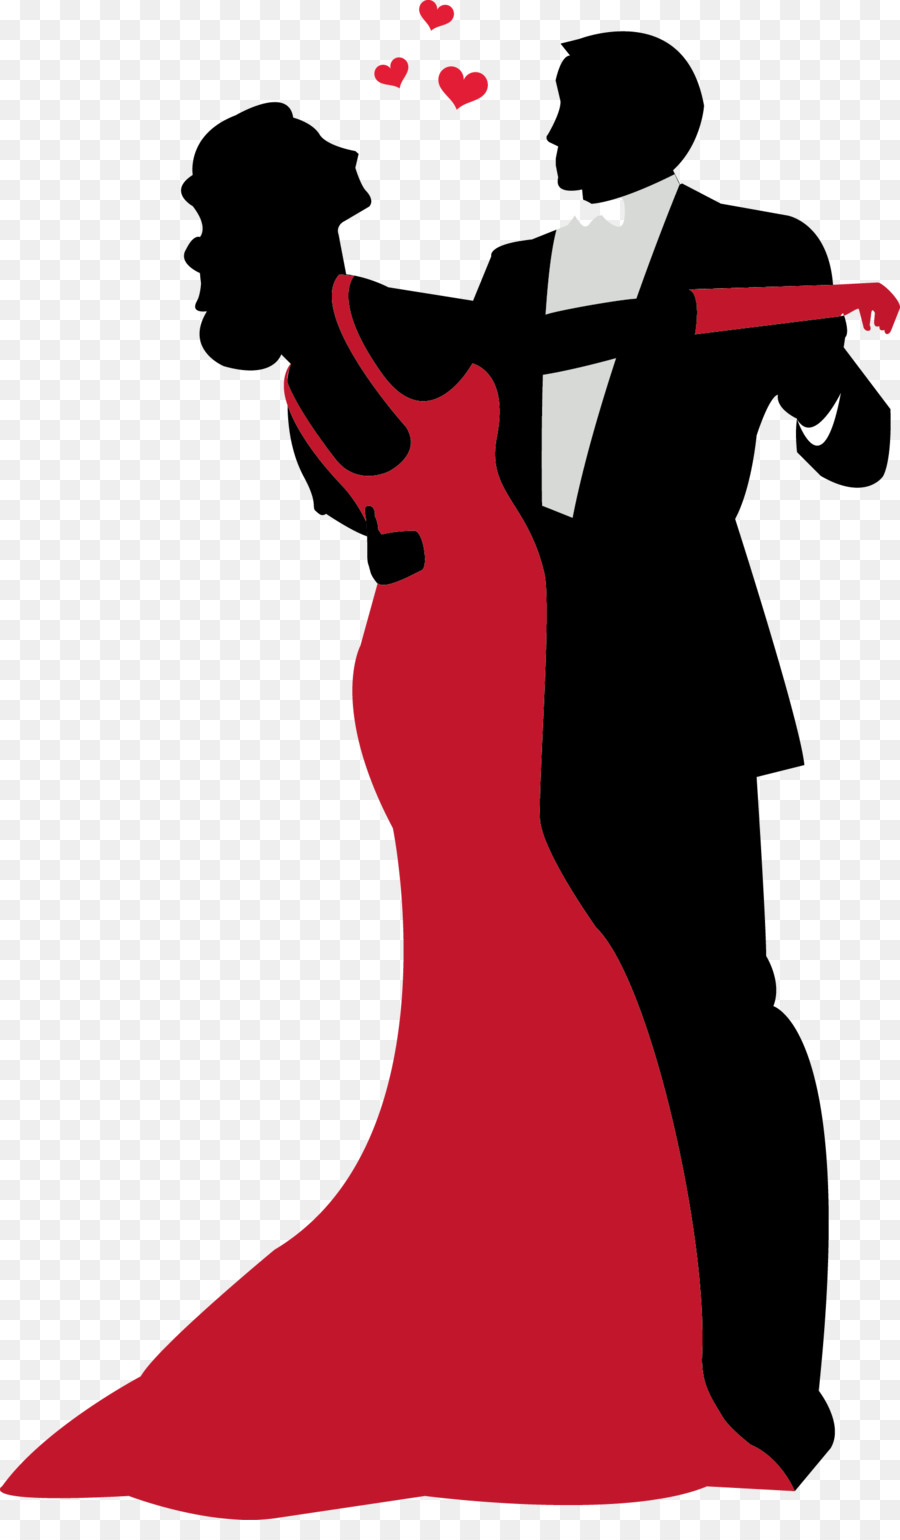 Ballroom dance Silhouette Clip art - Dancing Cane Cliparts png download - 1627*2748 - Free Transparent Dance png Download.